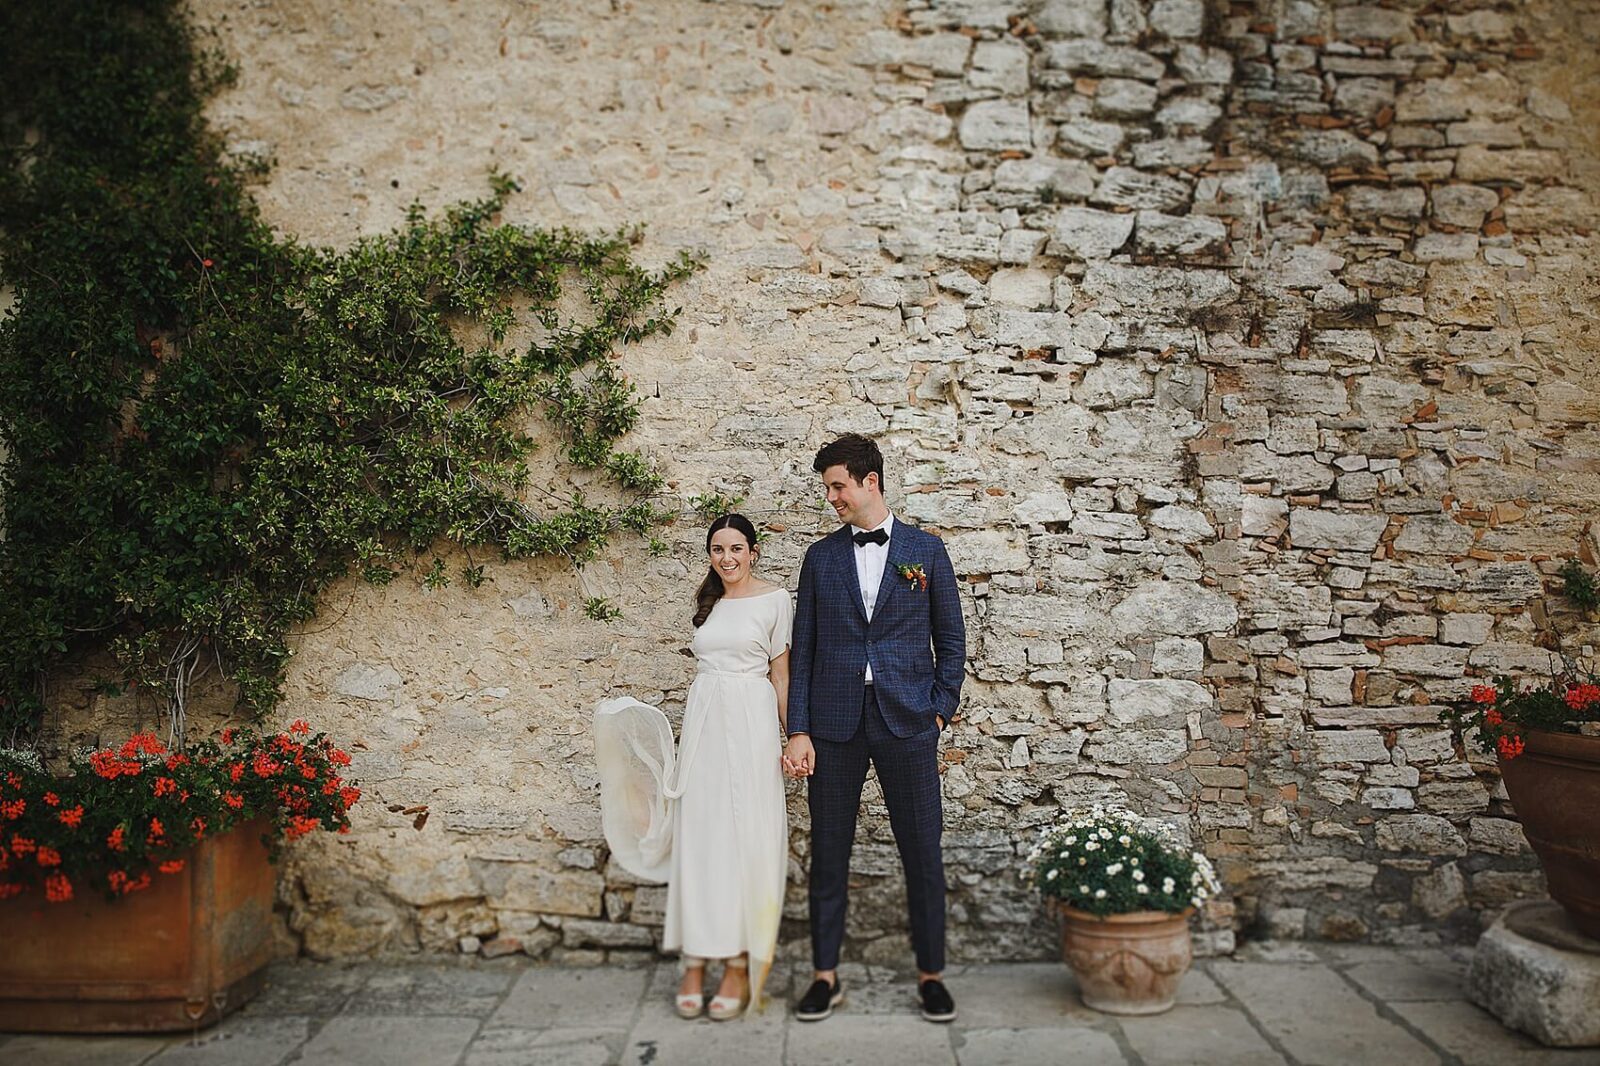 Modern painted wedding dress in Umbria